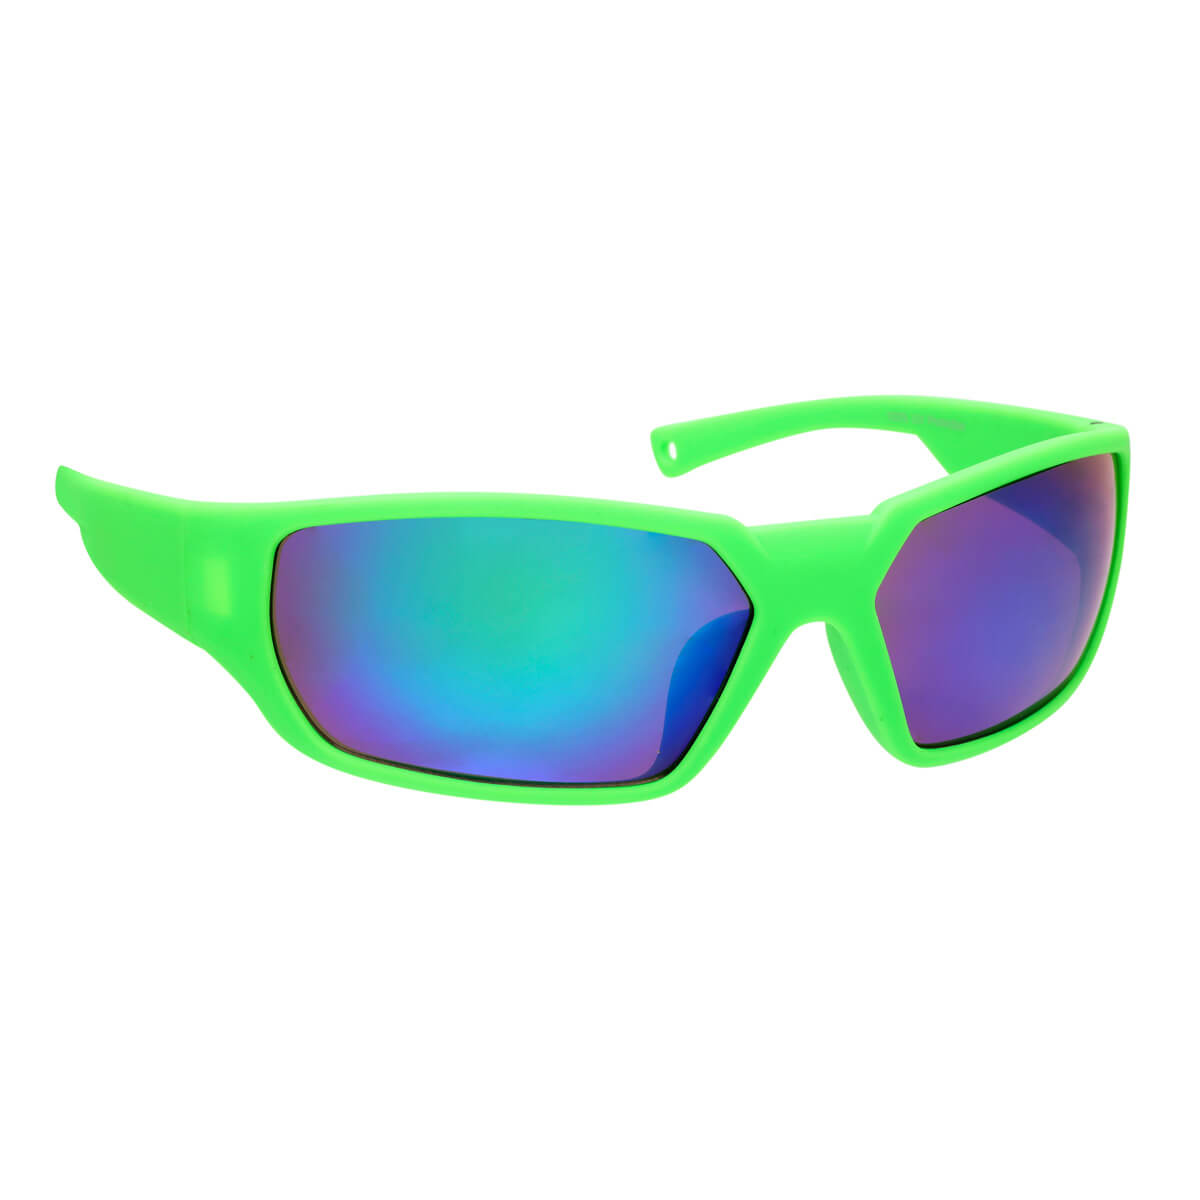 Colorful sunglasses for sports